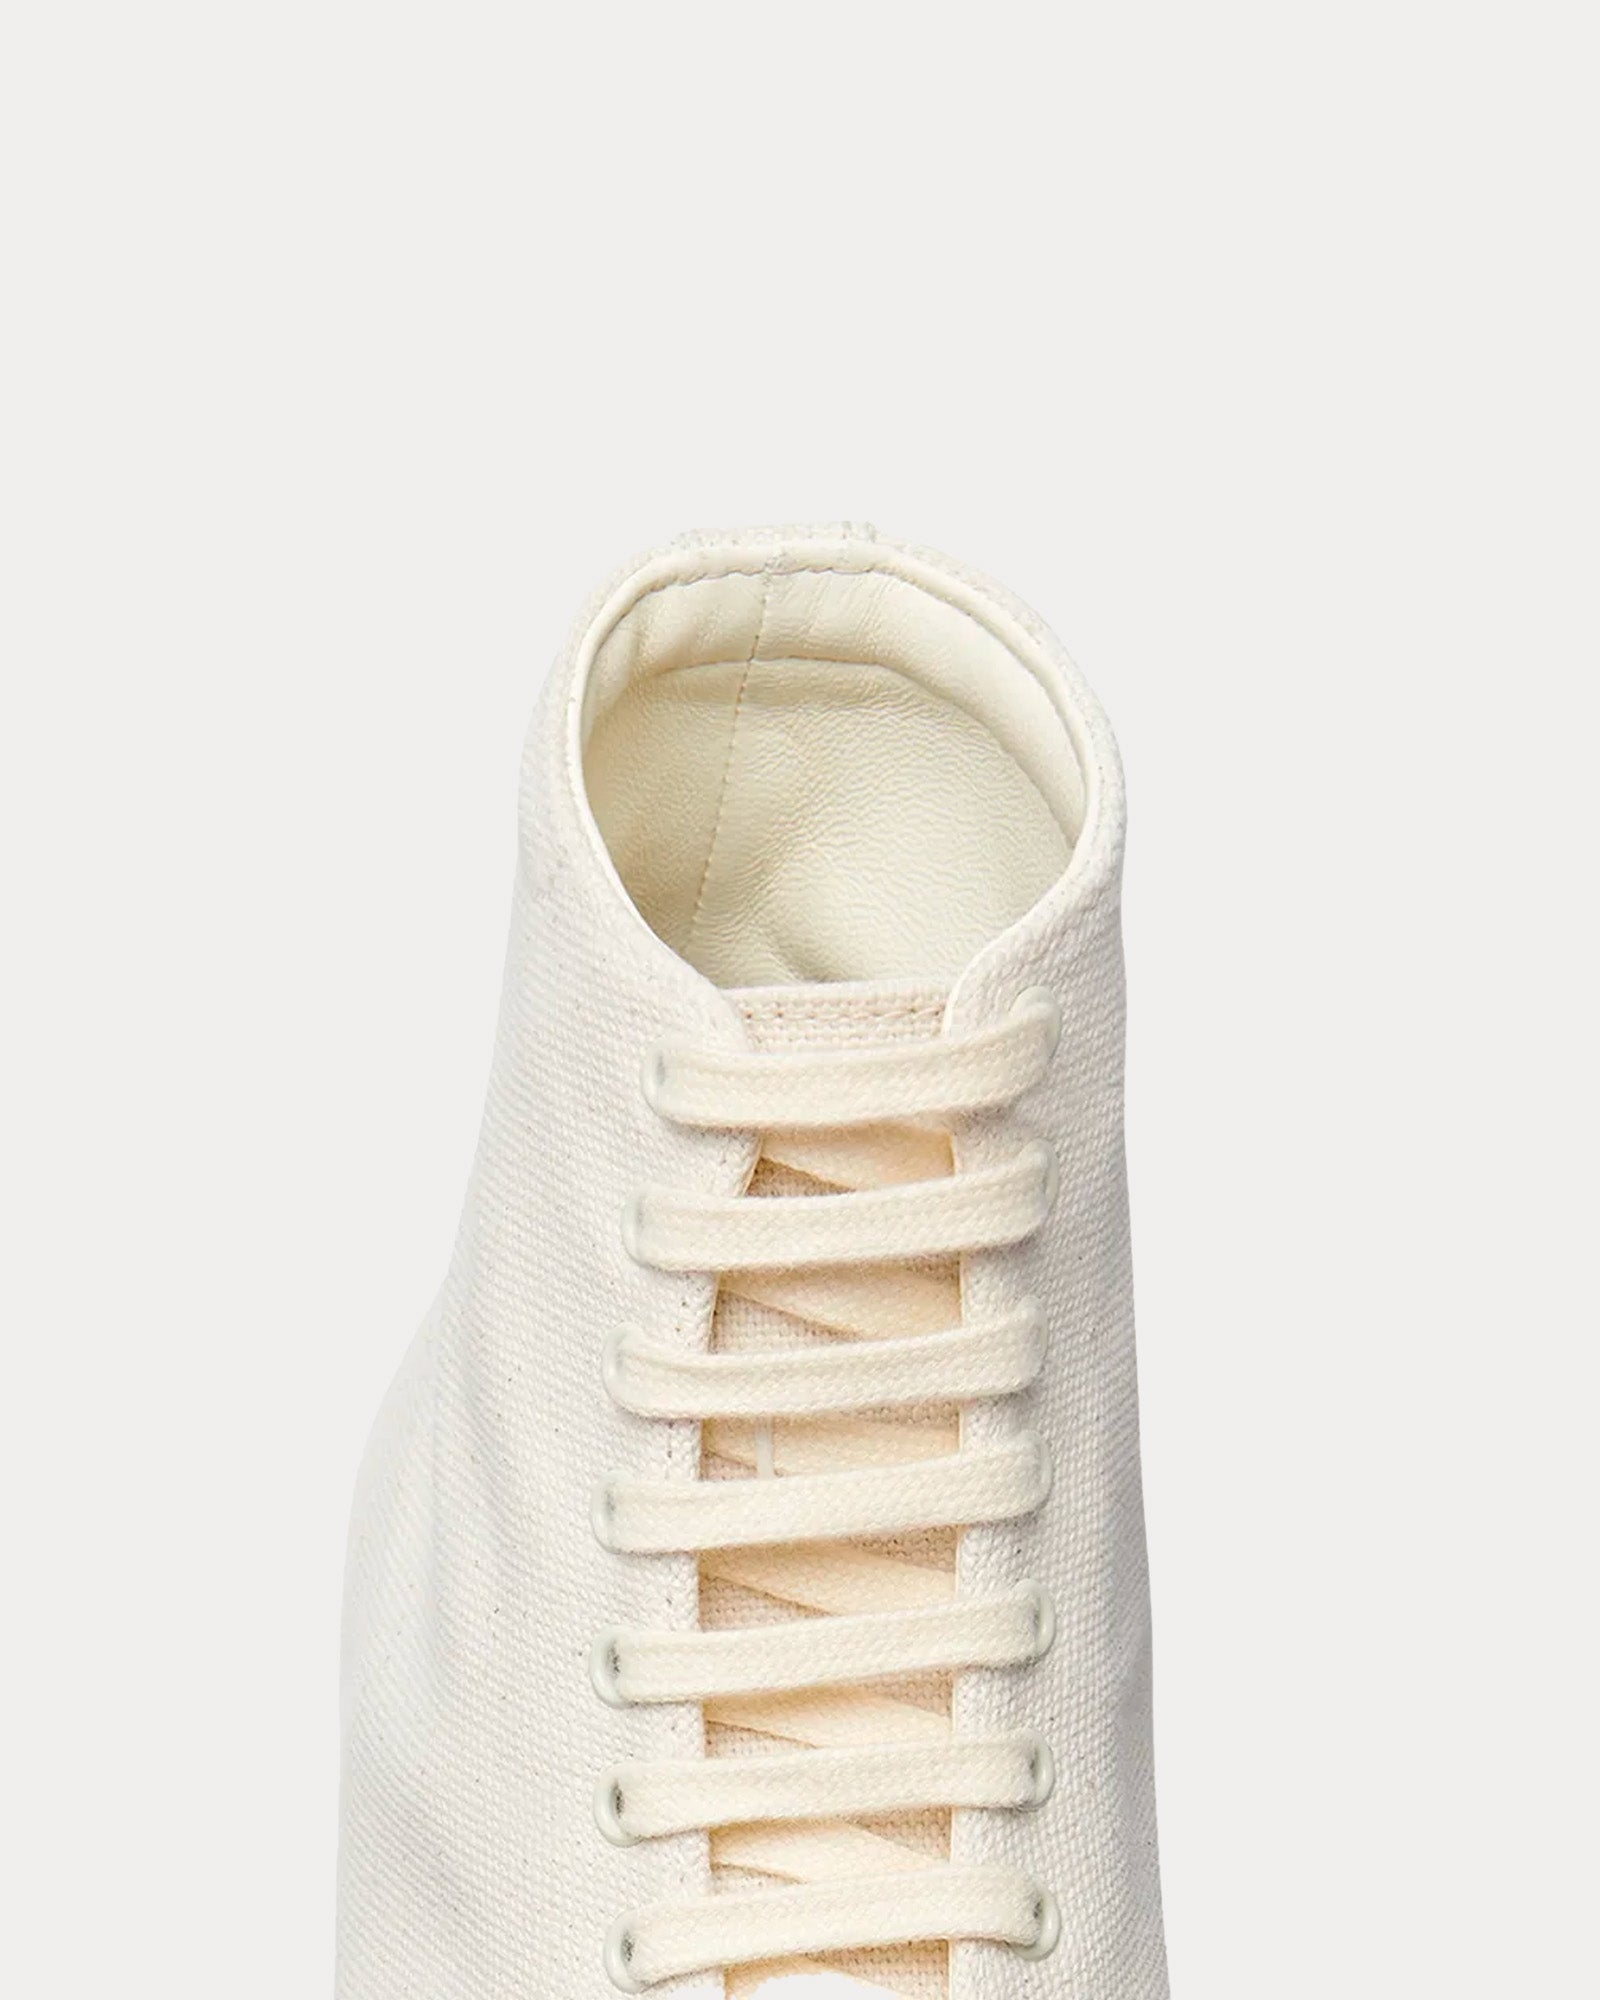 The Row - Sam Canvas Ivory / Panna High Top Sneakers